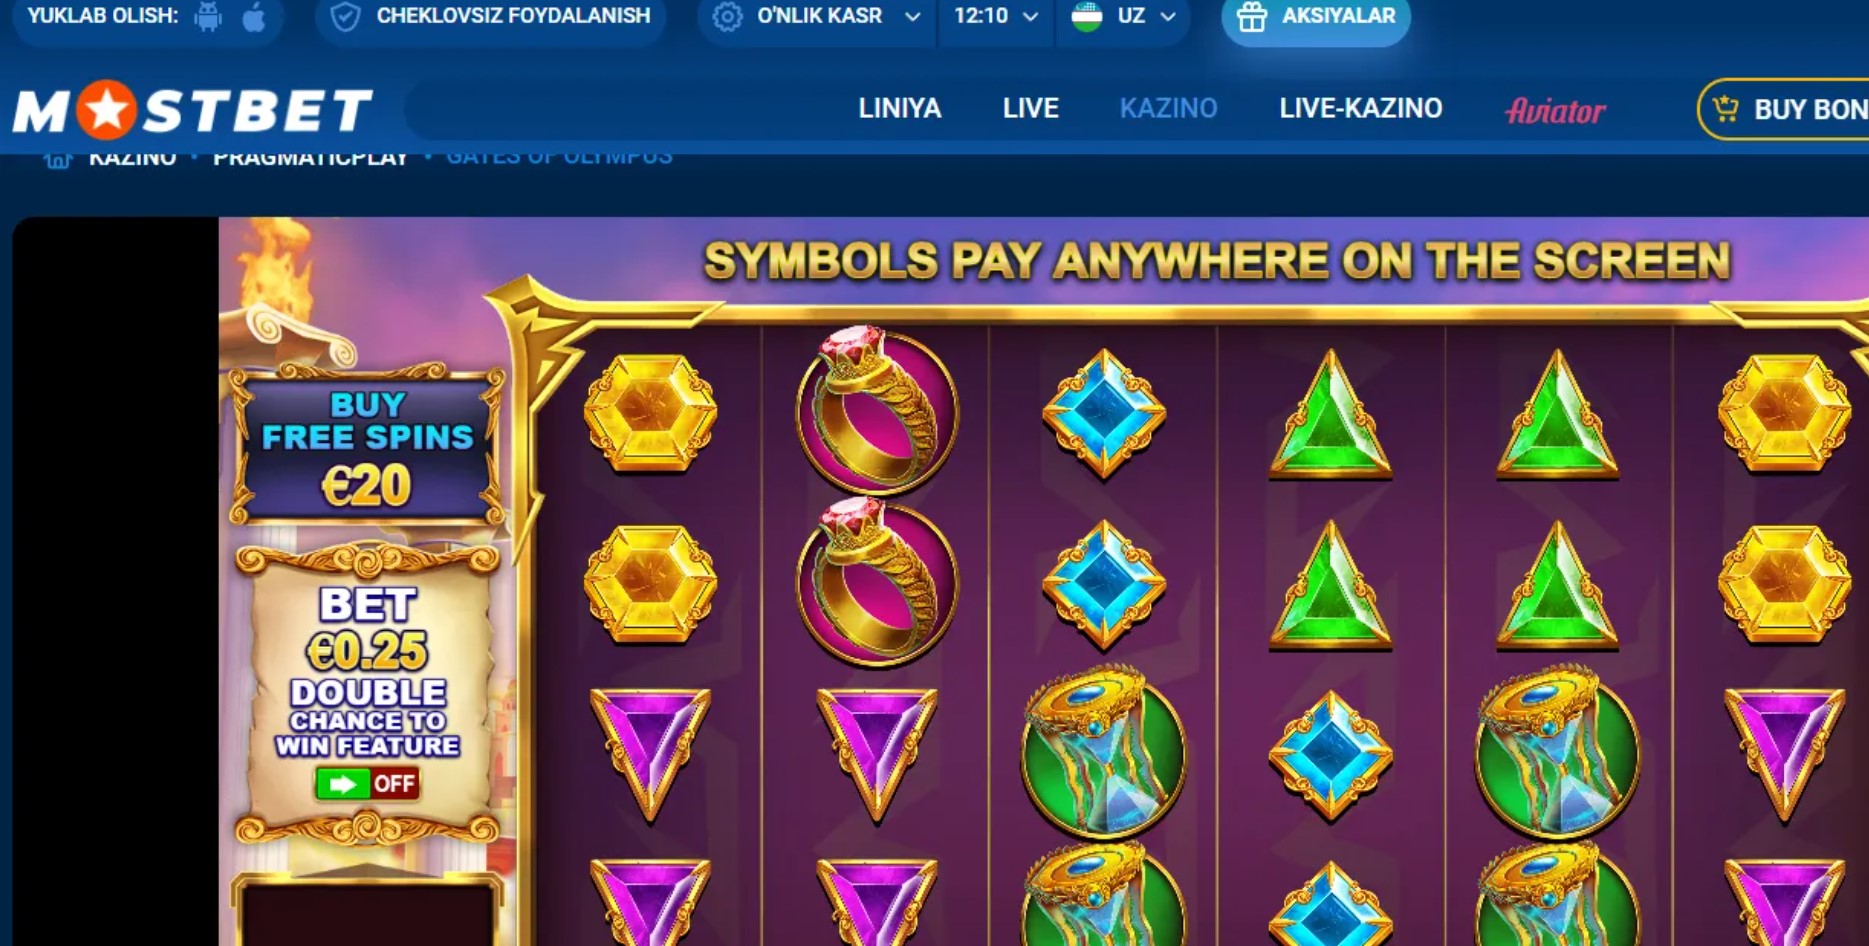 Casino eng yaxshi onlayn Is Your Worst Enemy. 10 Ways To Defeat It